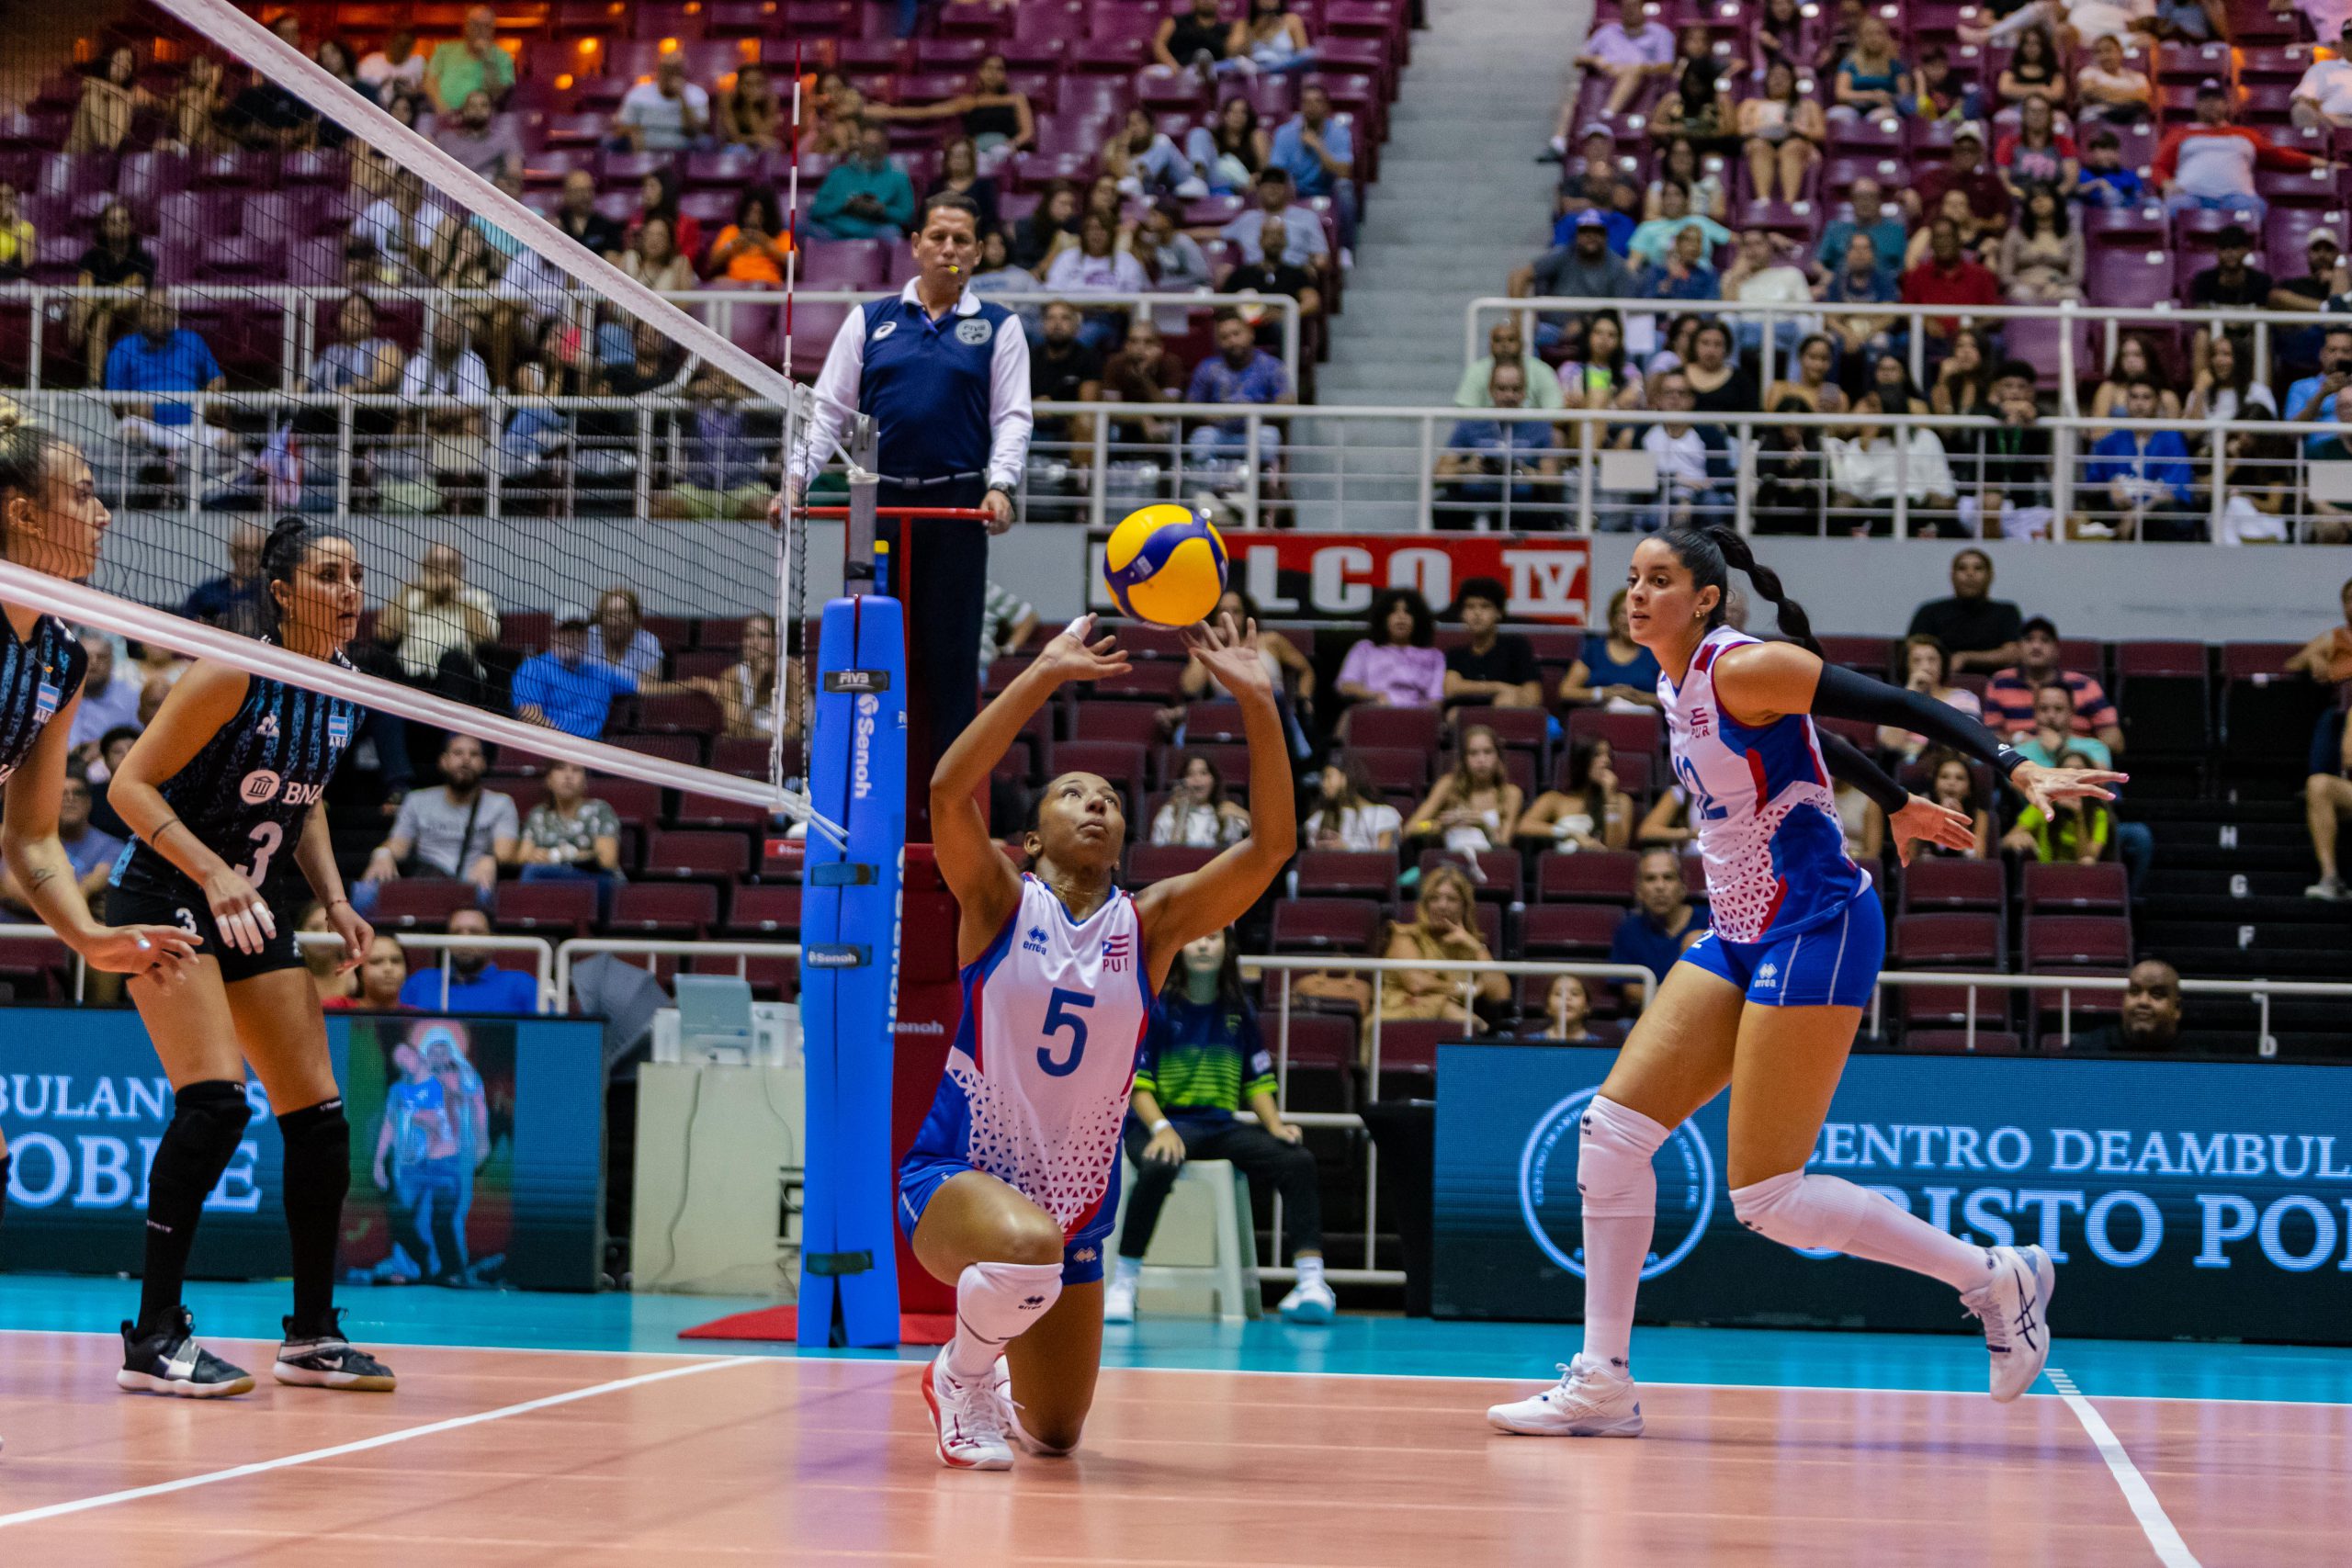 Puerto Rico’s blocking was the key against Argentina in the fifth set 